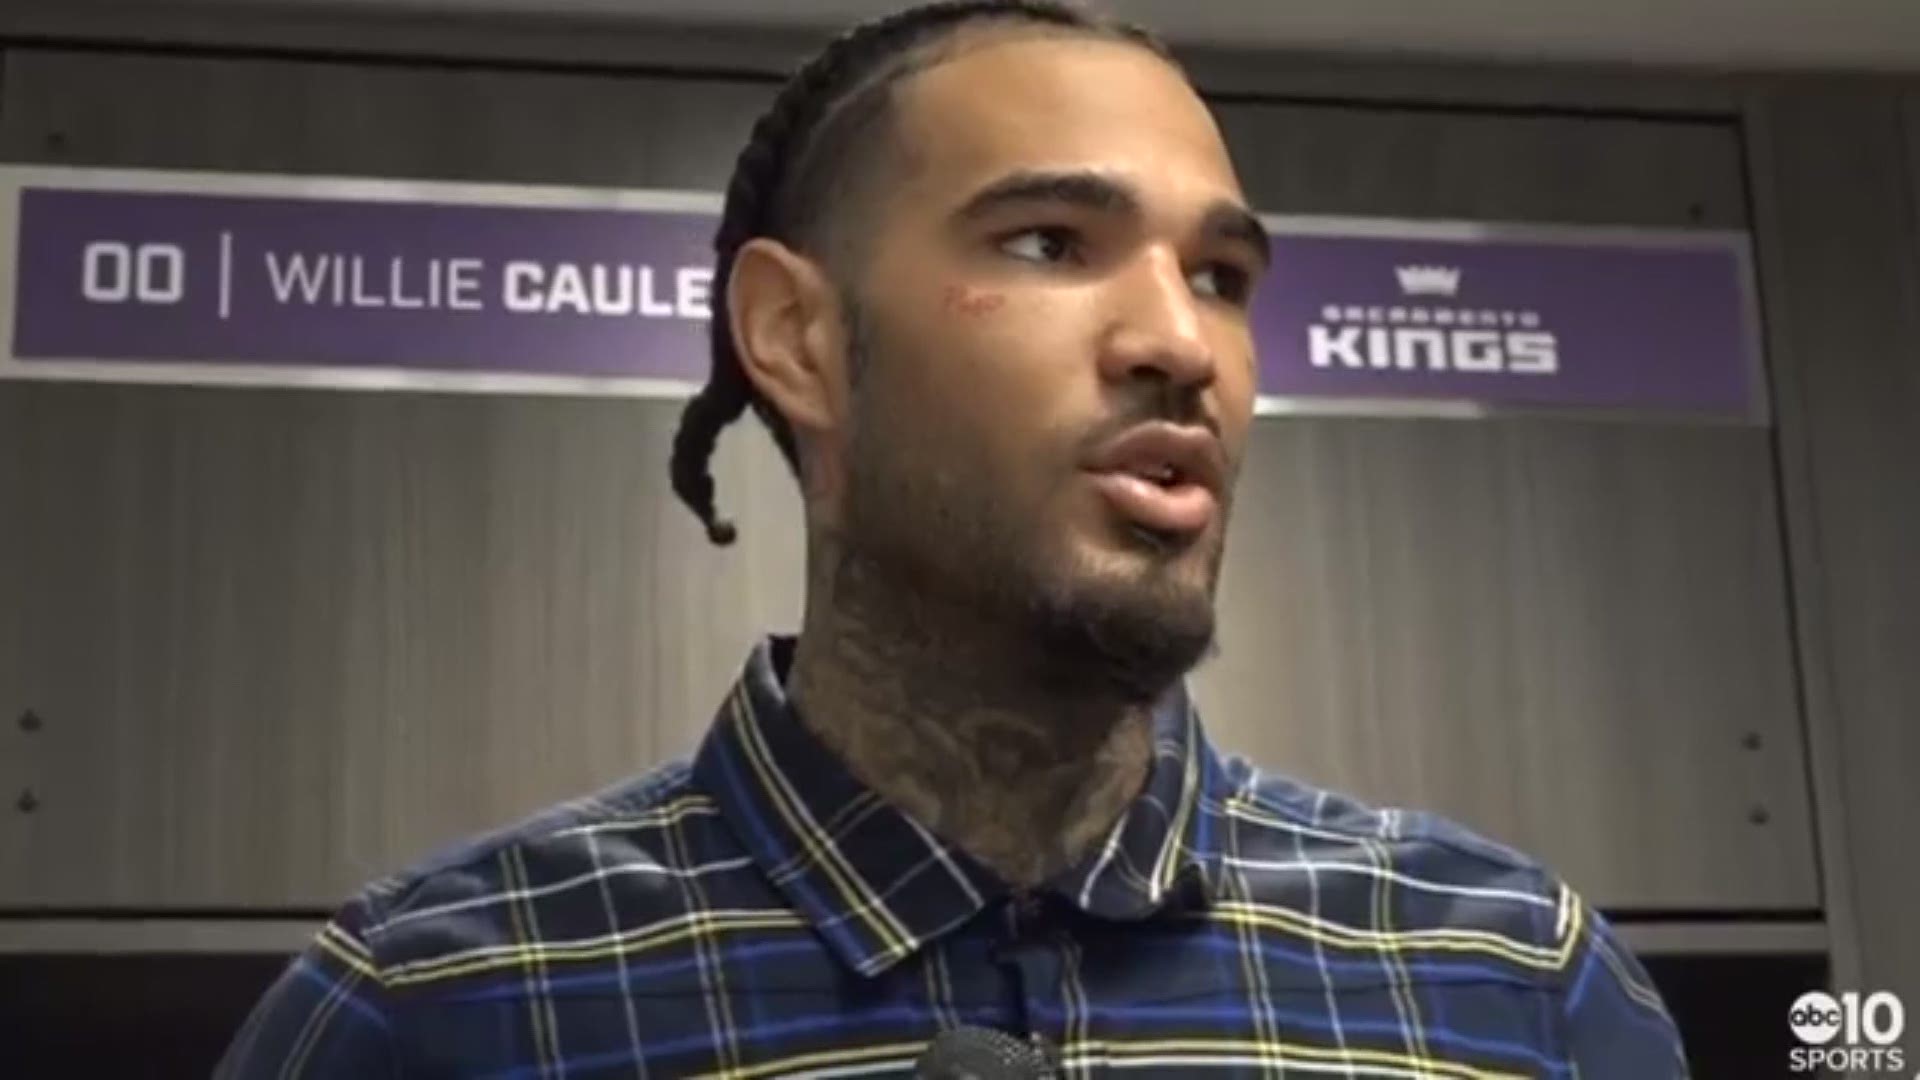 Kings center Willie Cauley-Stein analyzes Tuesday's 111-109 loss to the Celtics at Golden 1 Center, the way Boston plays without Kyrie Irving and how he feels Sacramento's chances are for the playoffs, now situated four games behind the eighth and final playoff spot in the Western Conference.